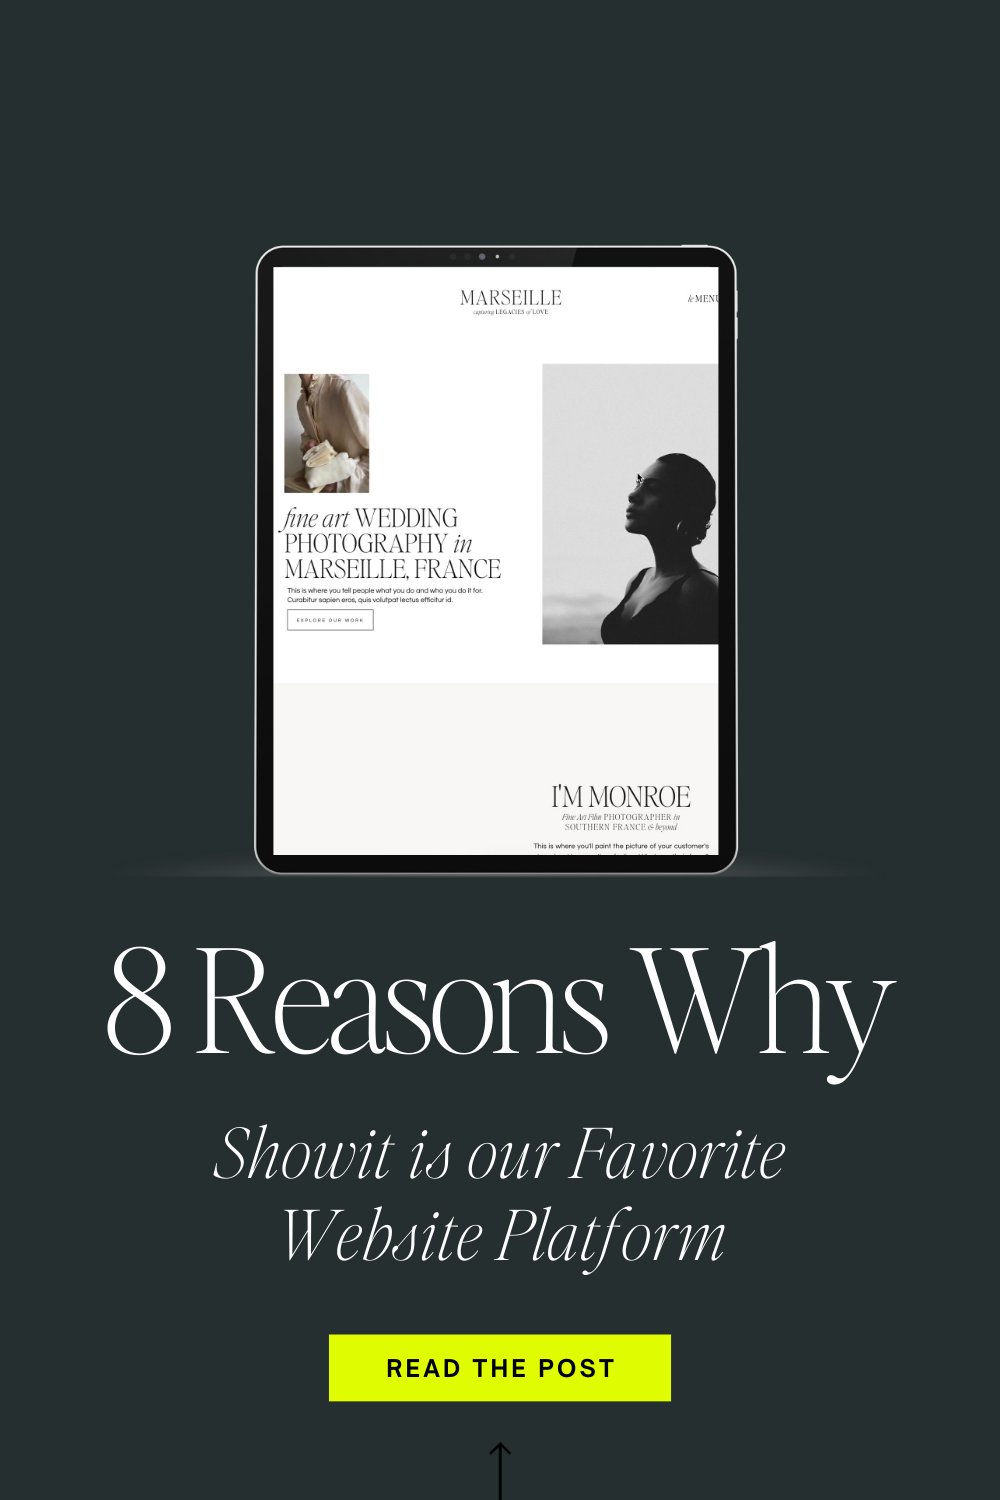 8 Reasons Why Showit is our Favorite Website Platform